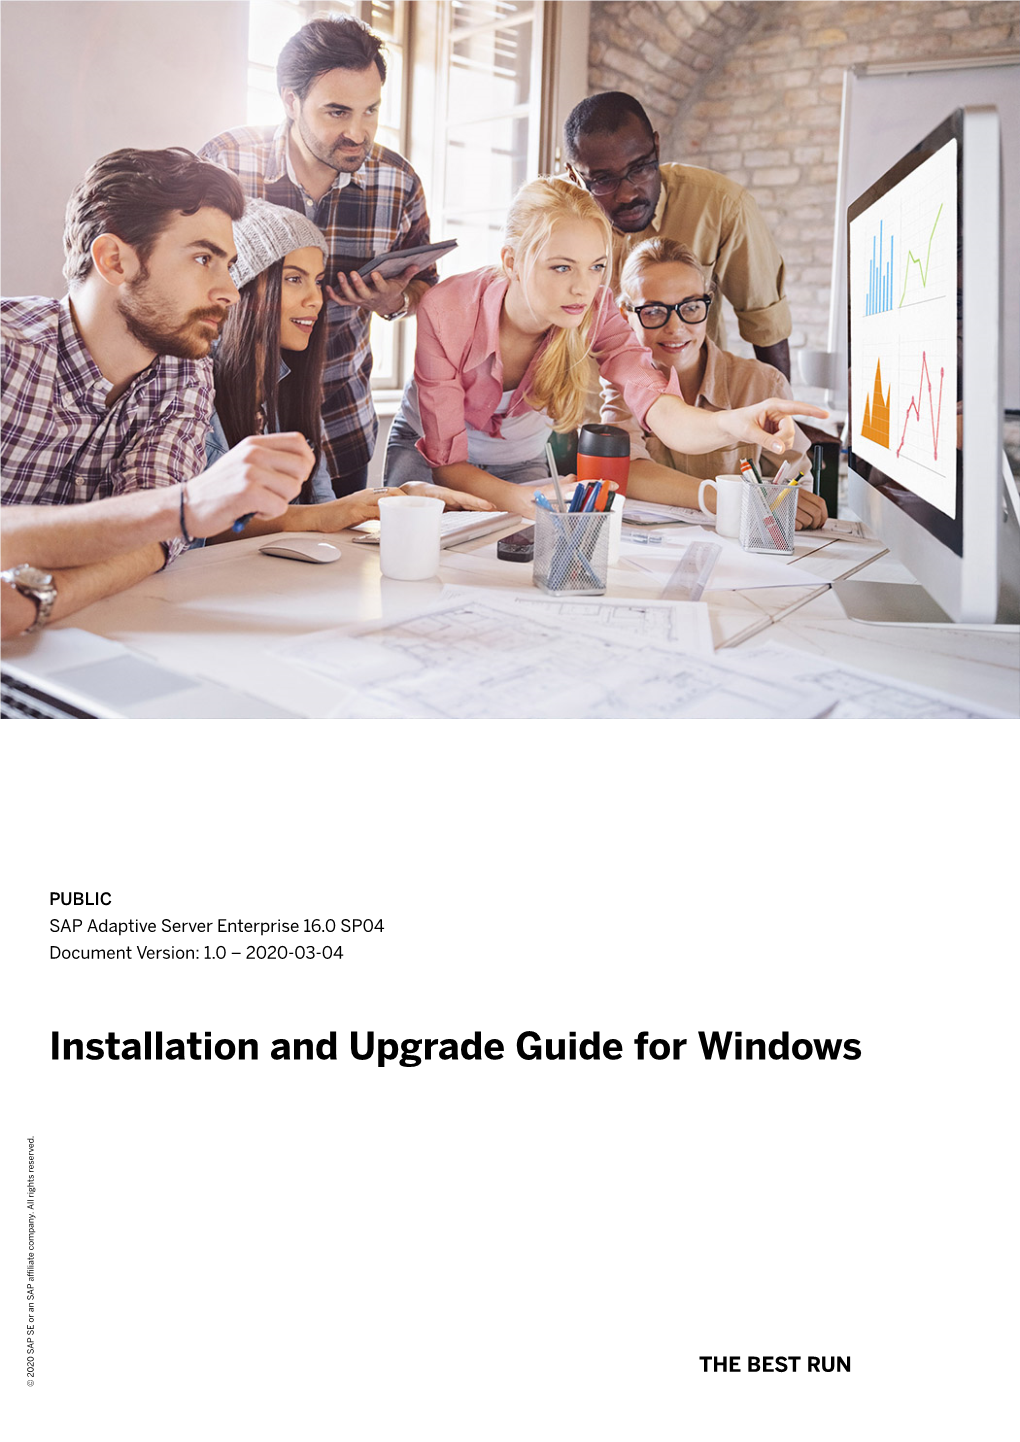 Installation and Upgrade Guide for Windows Company